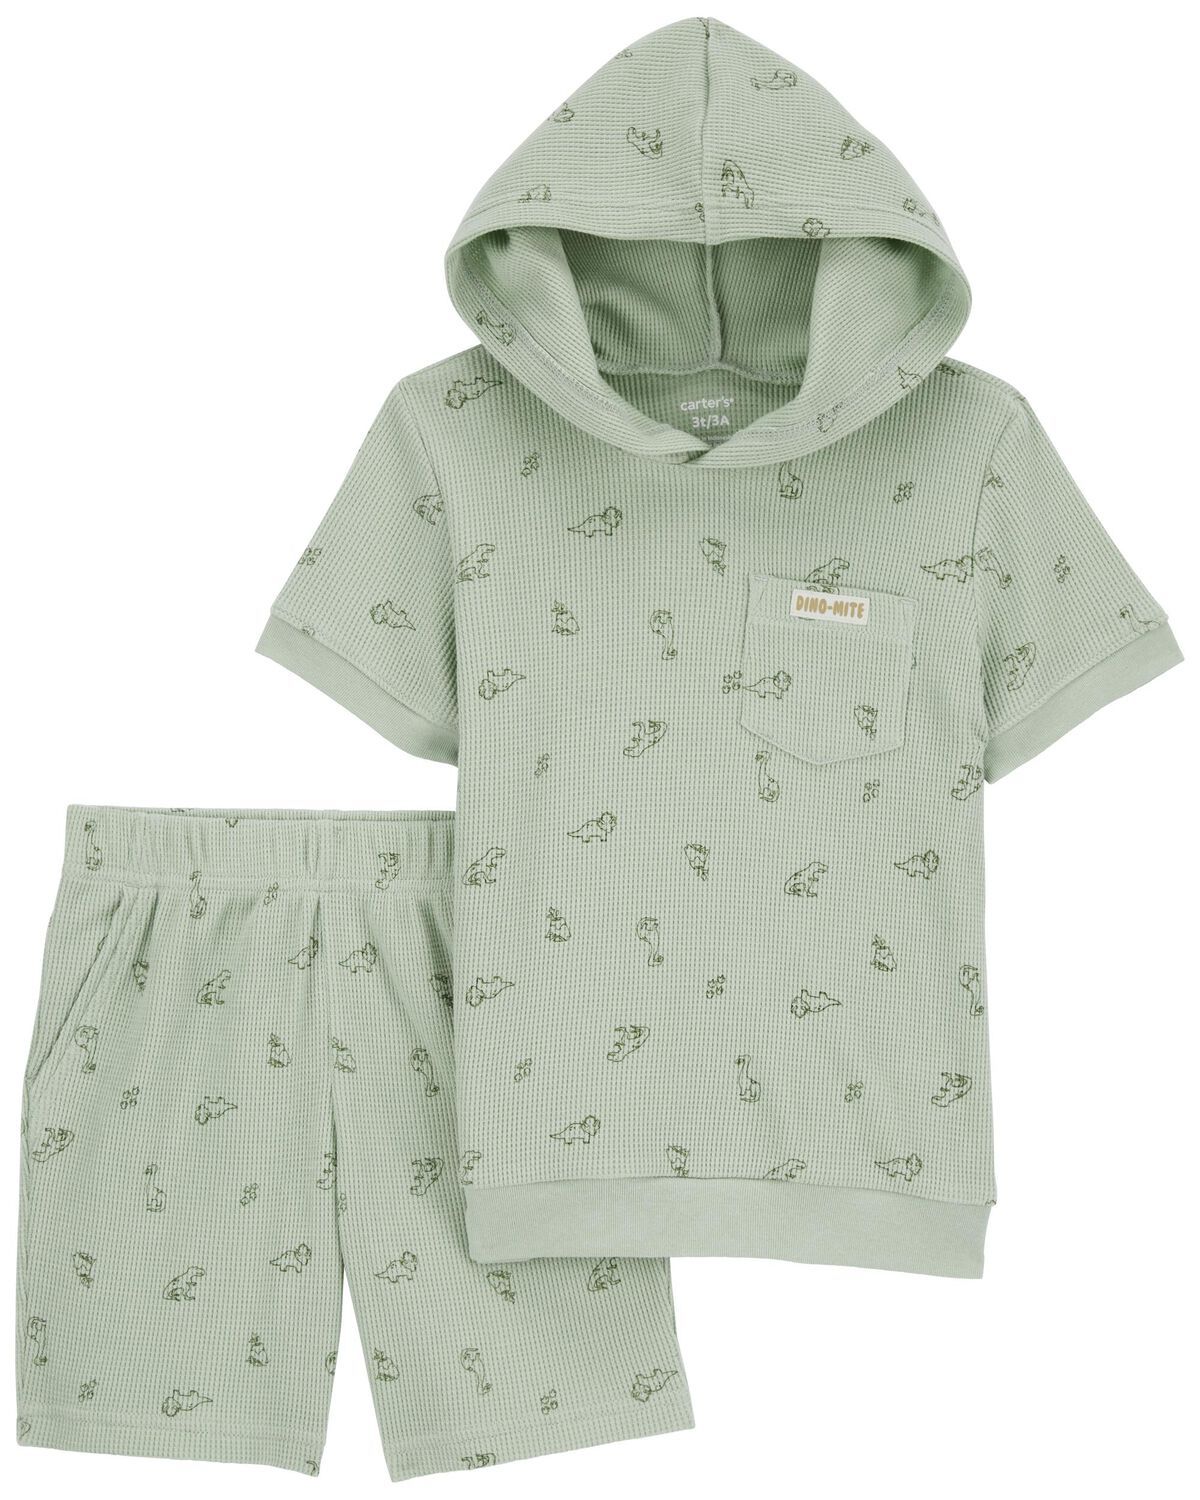 Toddler 2-Piece French Terry Dino Print Set | Carter's